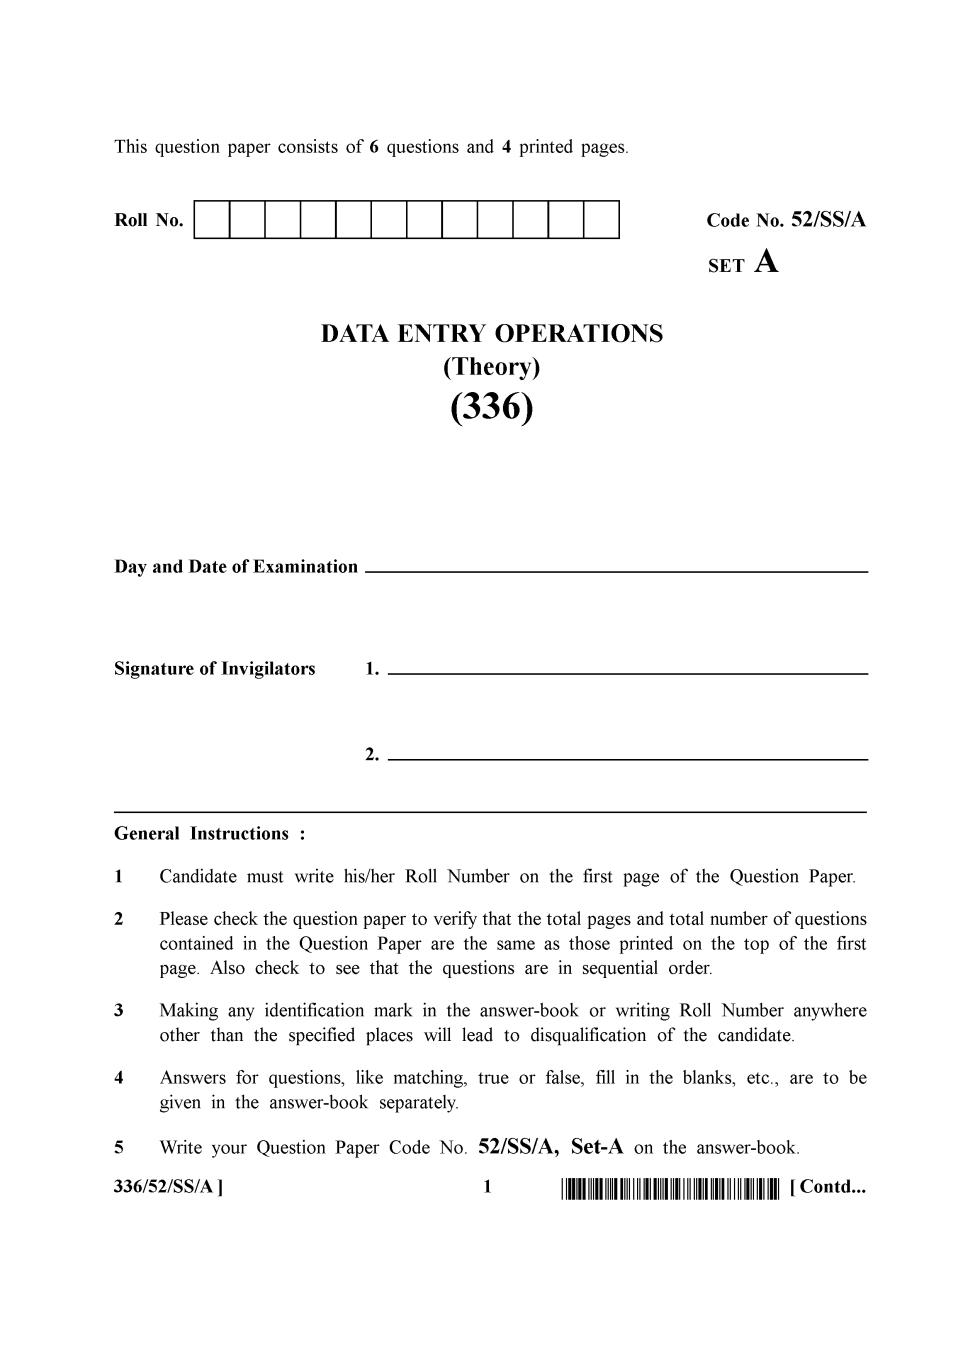 NIOS Class 12 Question Paper Apr 2016 - Data Entry Operations - Page 1